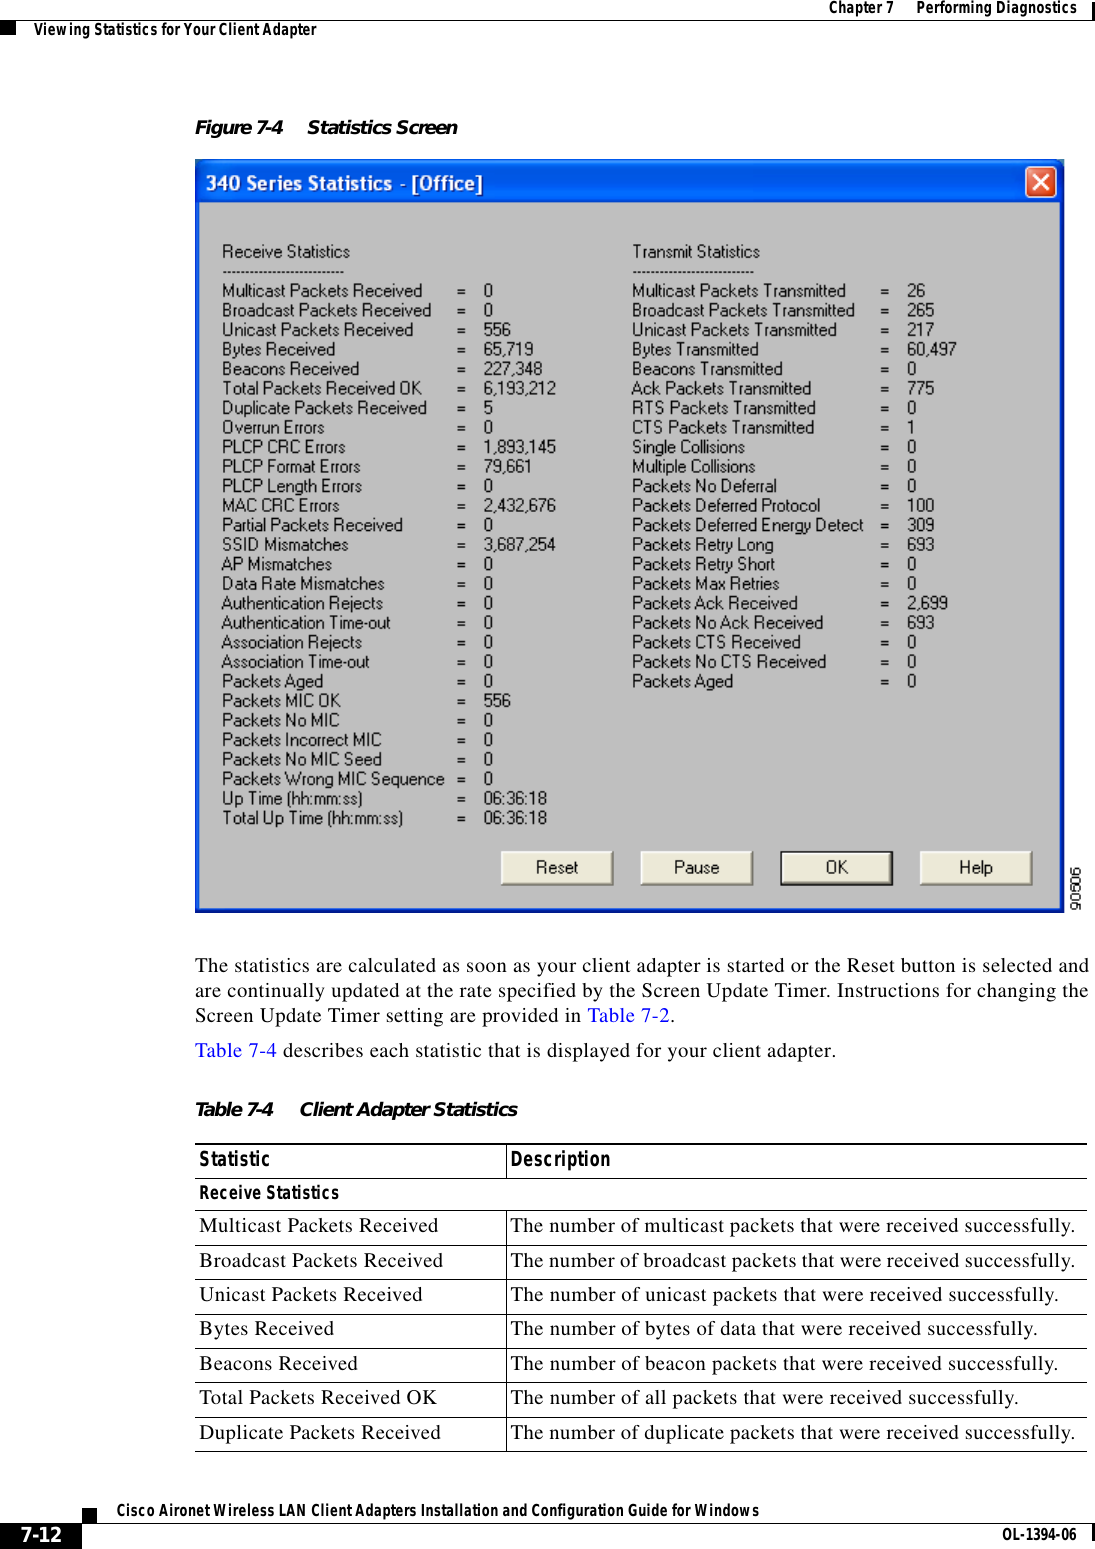 7-12Cisco Aironet Wireless LAN Client Adapters Installation and Configuration Guide for Windows OL-1394-06Chapter 7      Performing DiagnosticsViewing Statistics for Your Client AdapterFigure 7-4 Statistics ScreenThe statistics are calculated as soon as your client adapter is started or the Reset button is selected and are continually updated at the rate specified by the Screen Update Timer. Instructions for changing the Screen Update Timer setting are provided in Table 7-2.Table 7-4 describes each statistic that is displayed for your client adapter.Table 7-4 Client Adapter StatisticsStatistic DescriptionReceive StatisticsMulticast Packets Received The number of multicast packets that were received successfully.Broadcast Packets Received The number of broadcast packets that were received successfully.Unicast Packets Received The number of unicast packets that were received successfully.Bytes Received The number of bytes of data that were received successfully.Beacons Received The number of beacon packets that were received successfully.Total Packets Received OK The number of all packets that were received successfully.Duplicate Packets Received The number of duplicate packets that were received successfully.